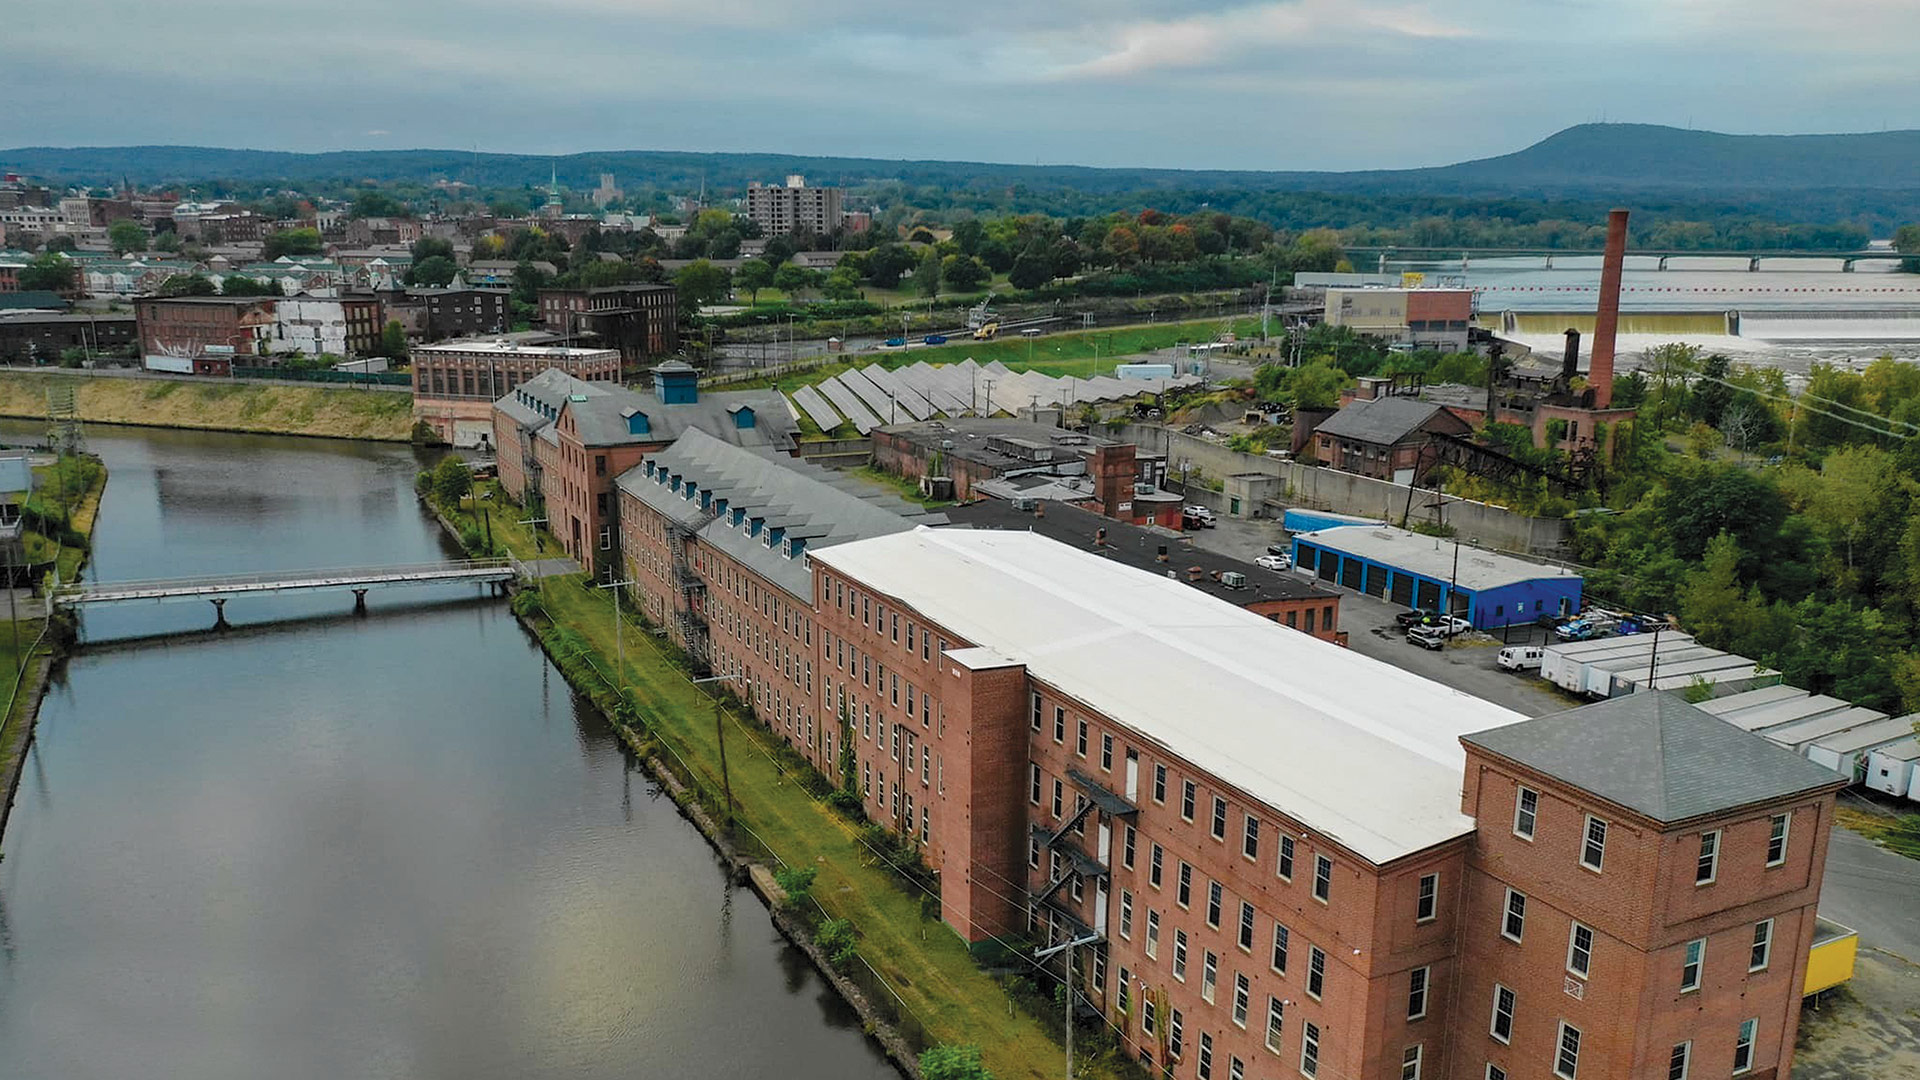 An aerial shot of Holyoke, one of its canals